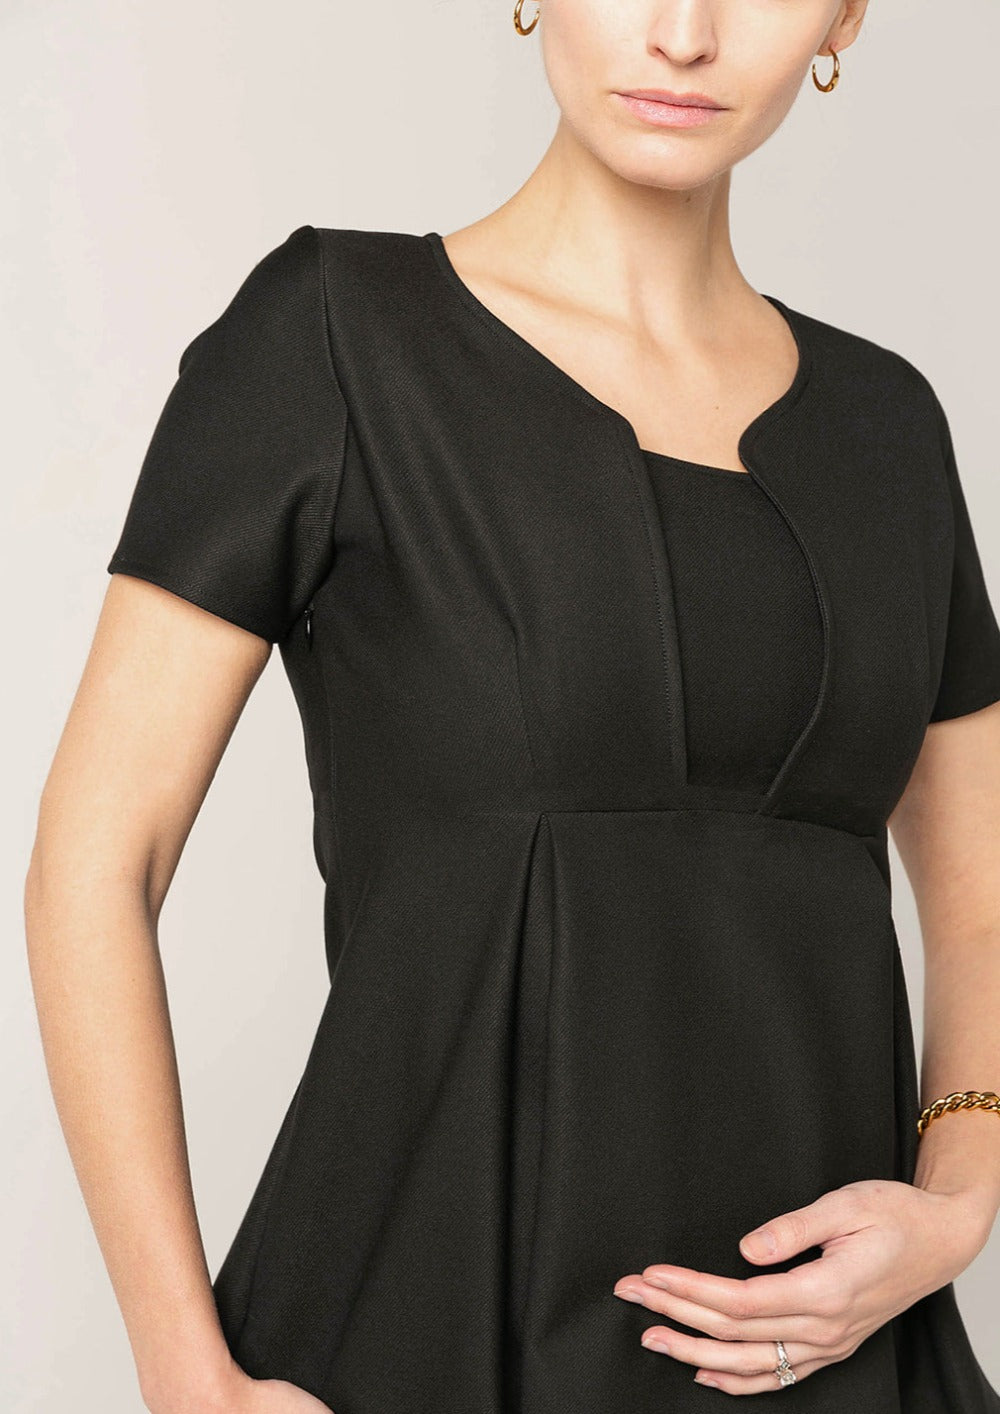 Corporate maternity suit top separate. Pairs with maternity pencil skirt. Black Italian designer stretch suiting fabric. 